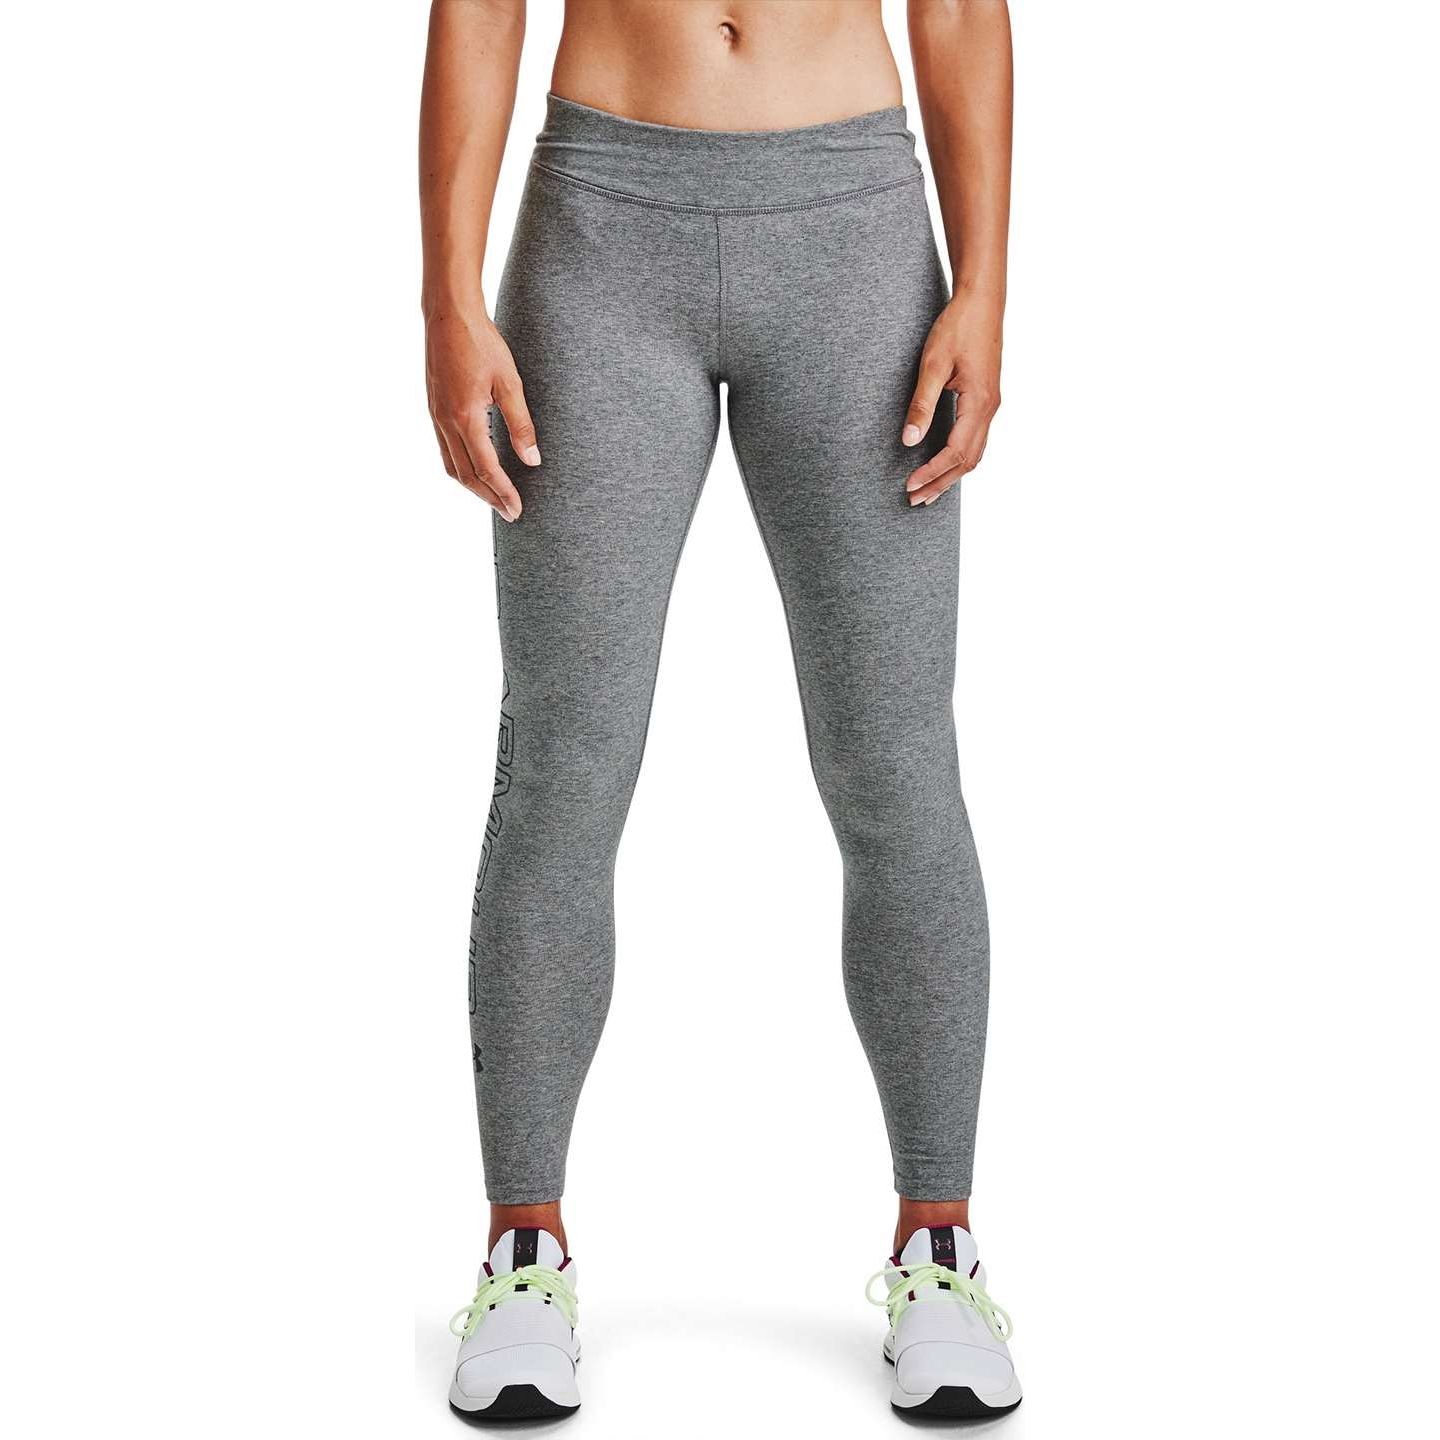 Stabilyx Joint Support Compression Tight - Women's Forest Night | CW-X